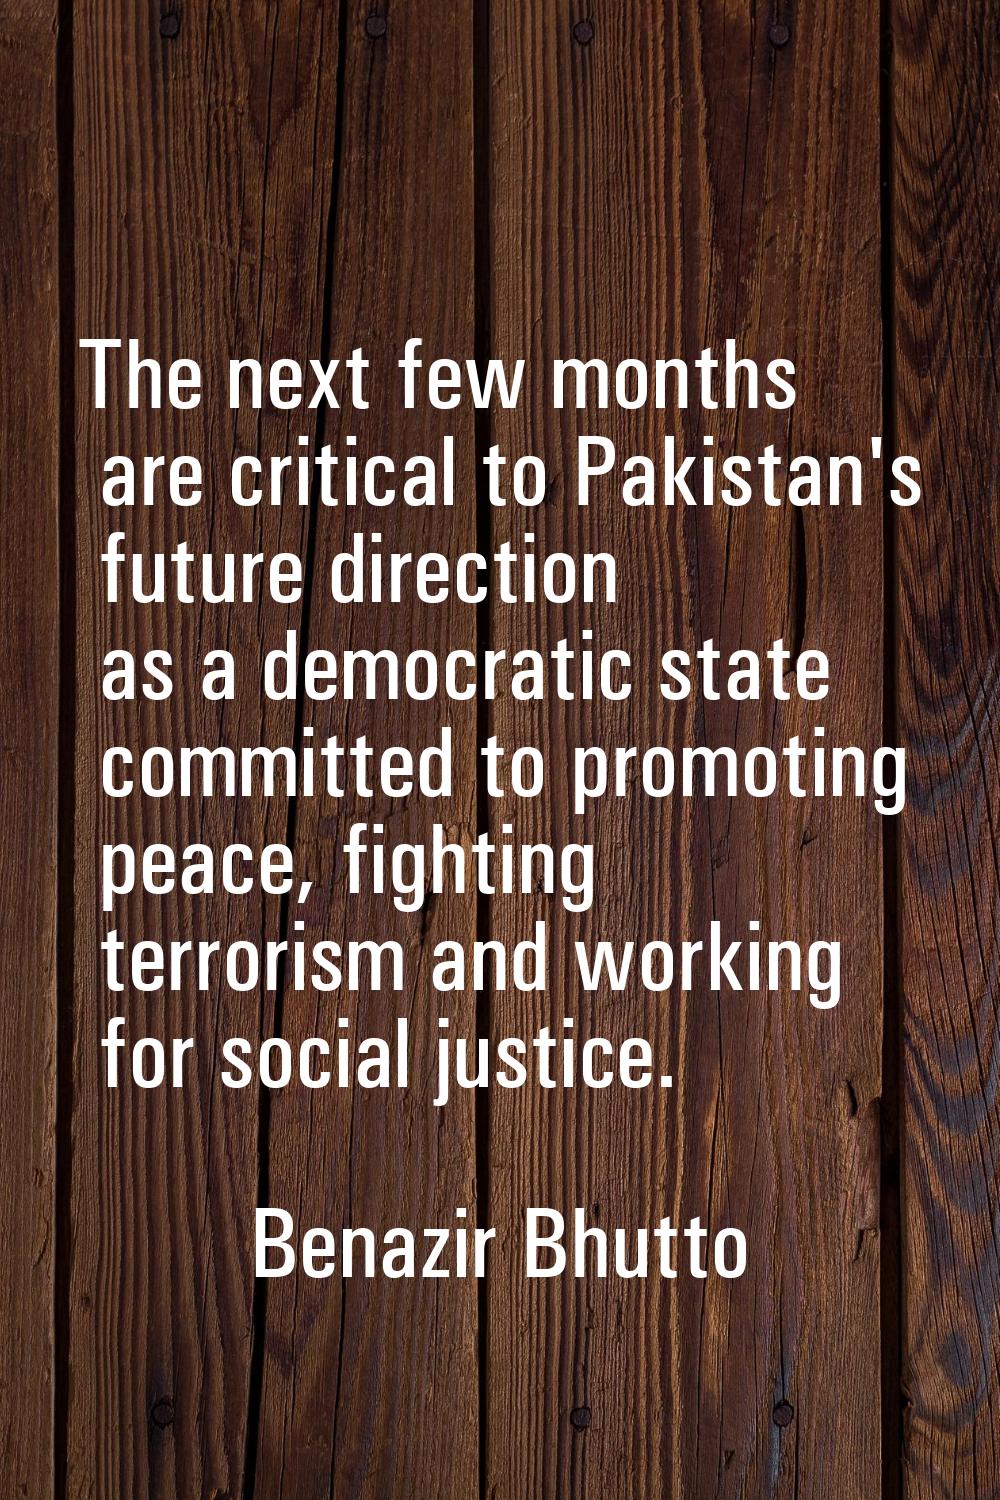 The next few months are critical to Pakistan's future direction as a democratic state committed to 